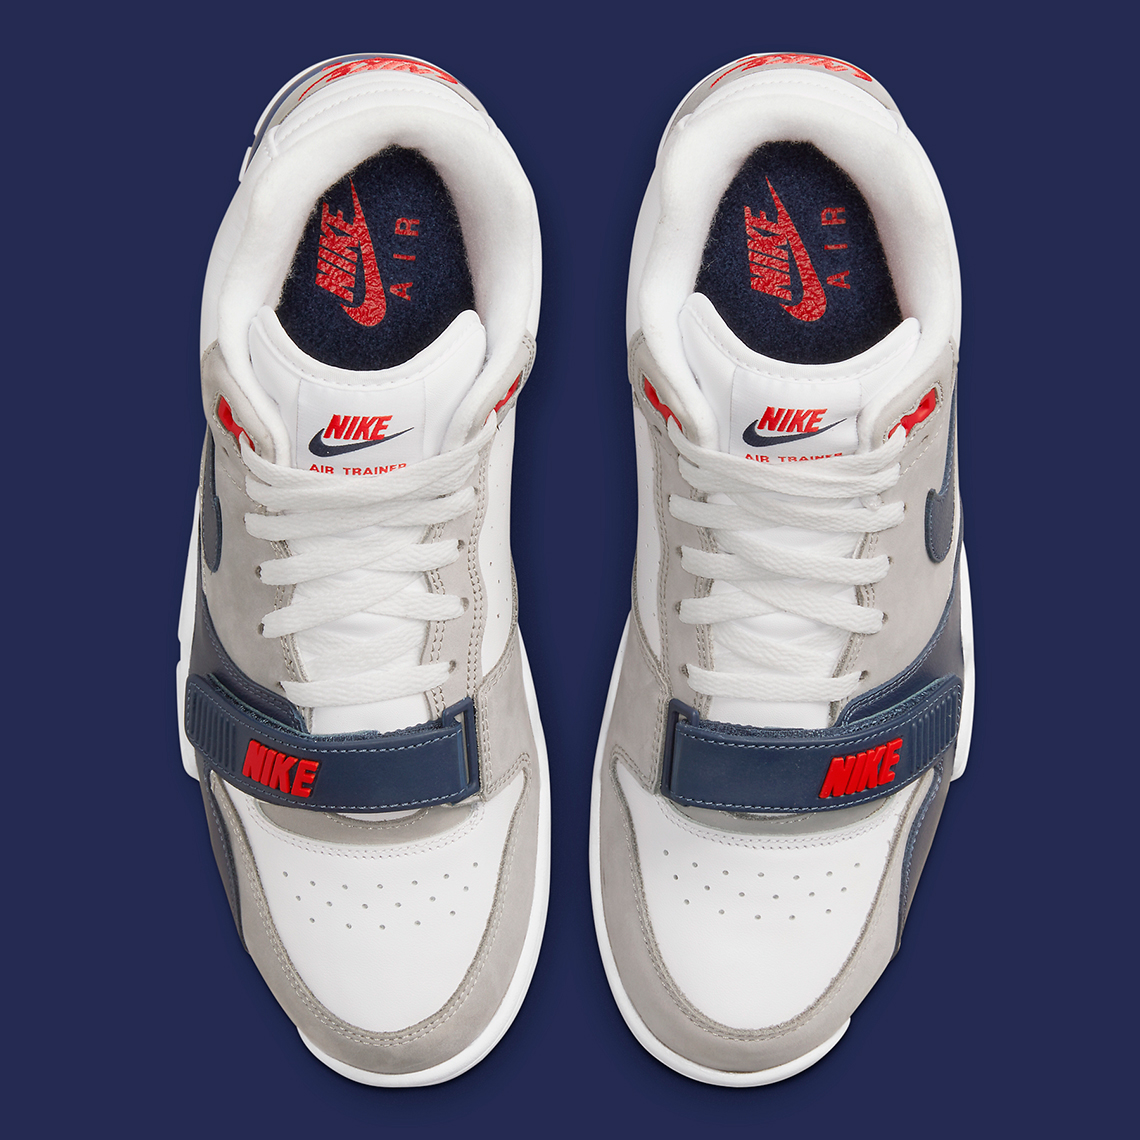 Nike Air Trainer 1 White Grey Navy Red Dm0521 101 1